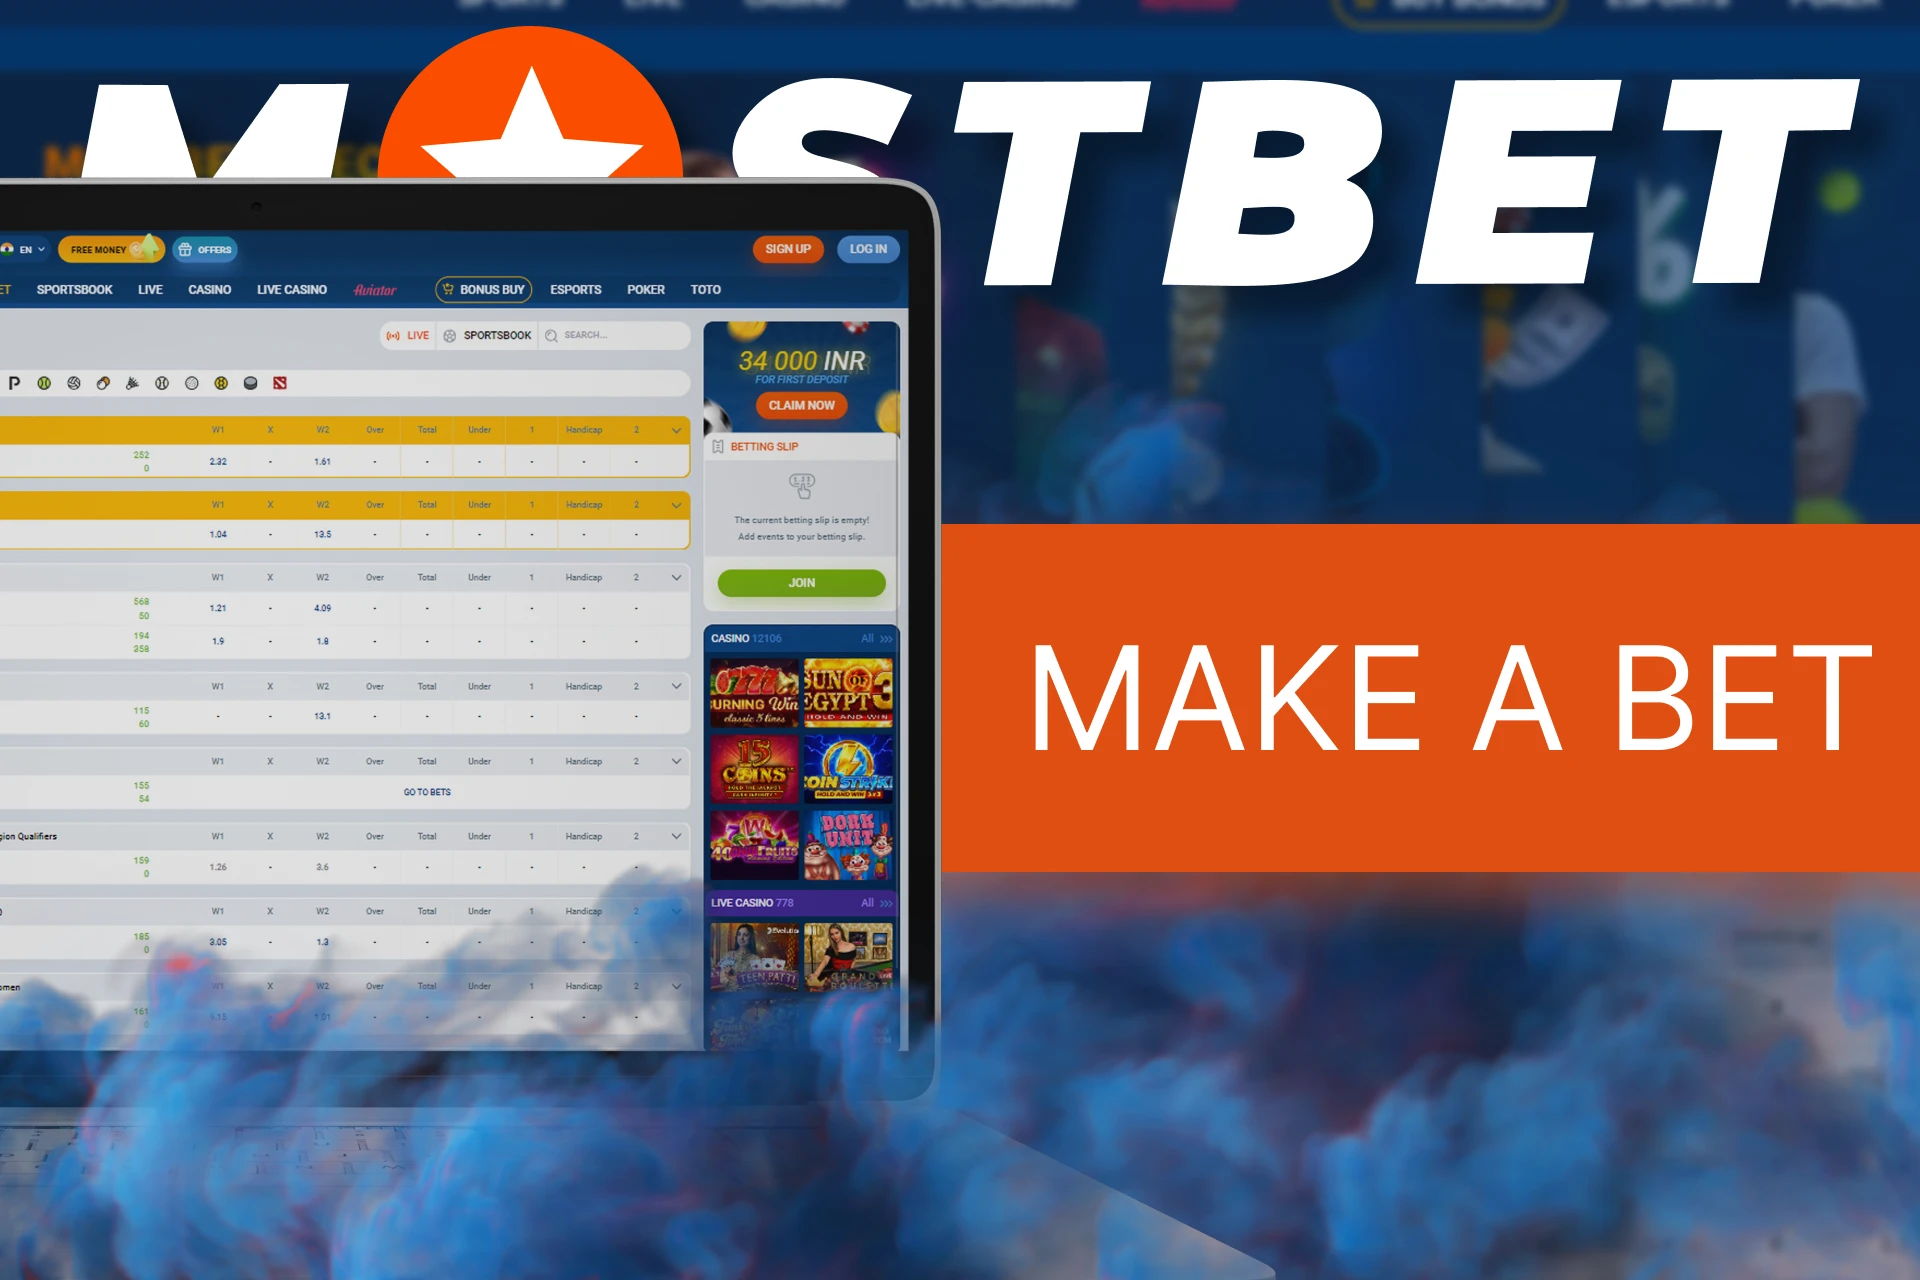 At Mostbet you can use the official website and make bets, and play casino games.